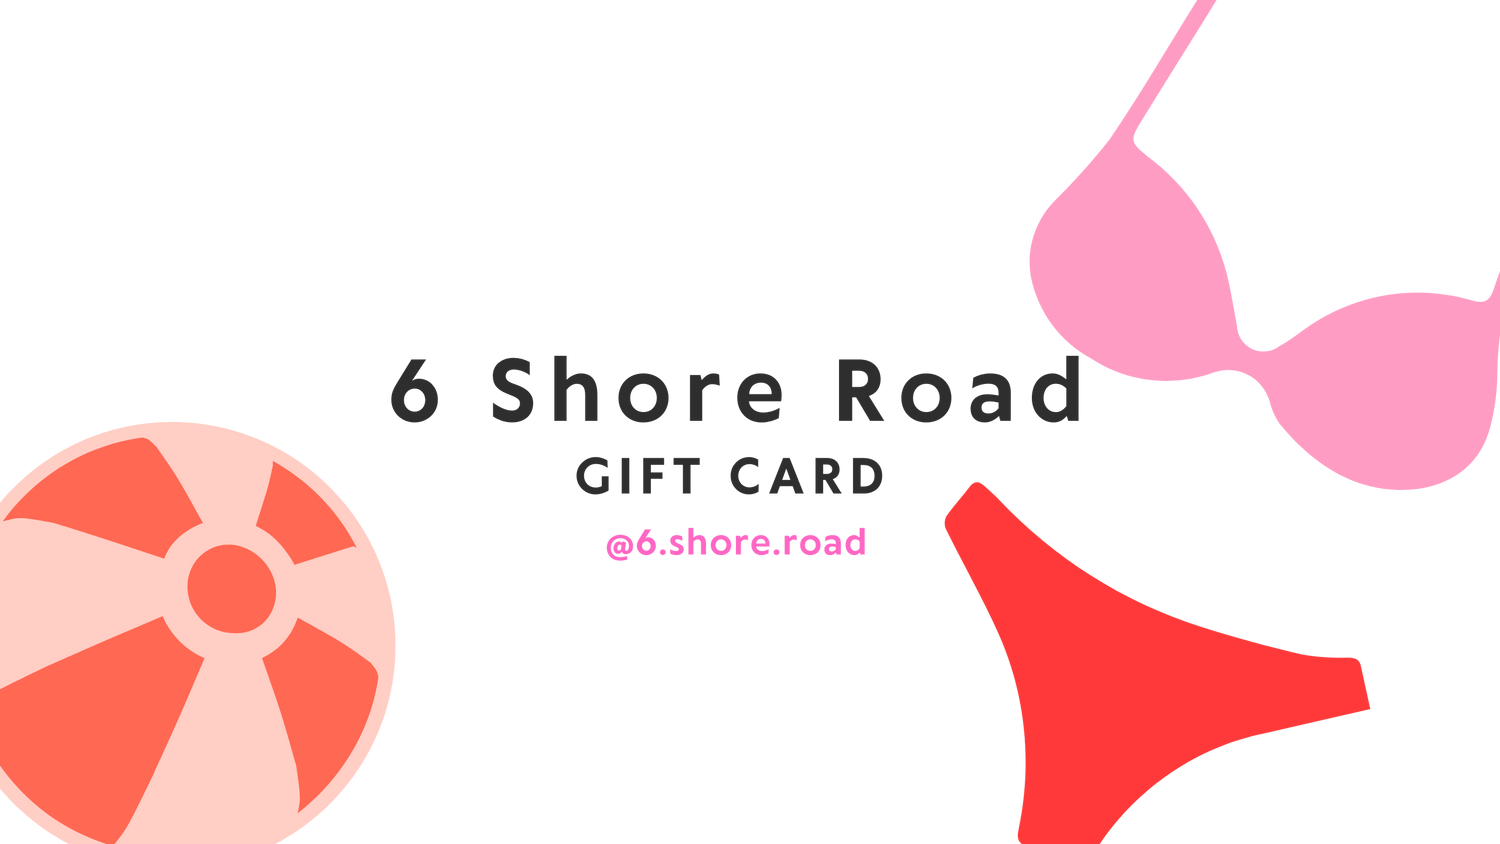 6 Shore Road Gift Card